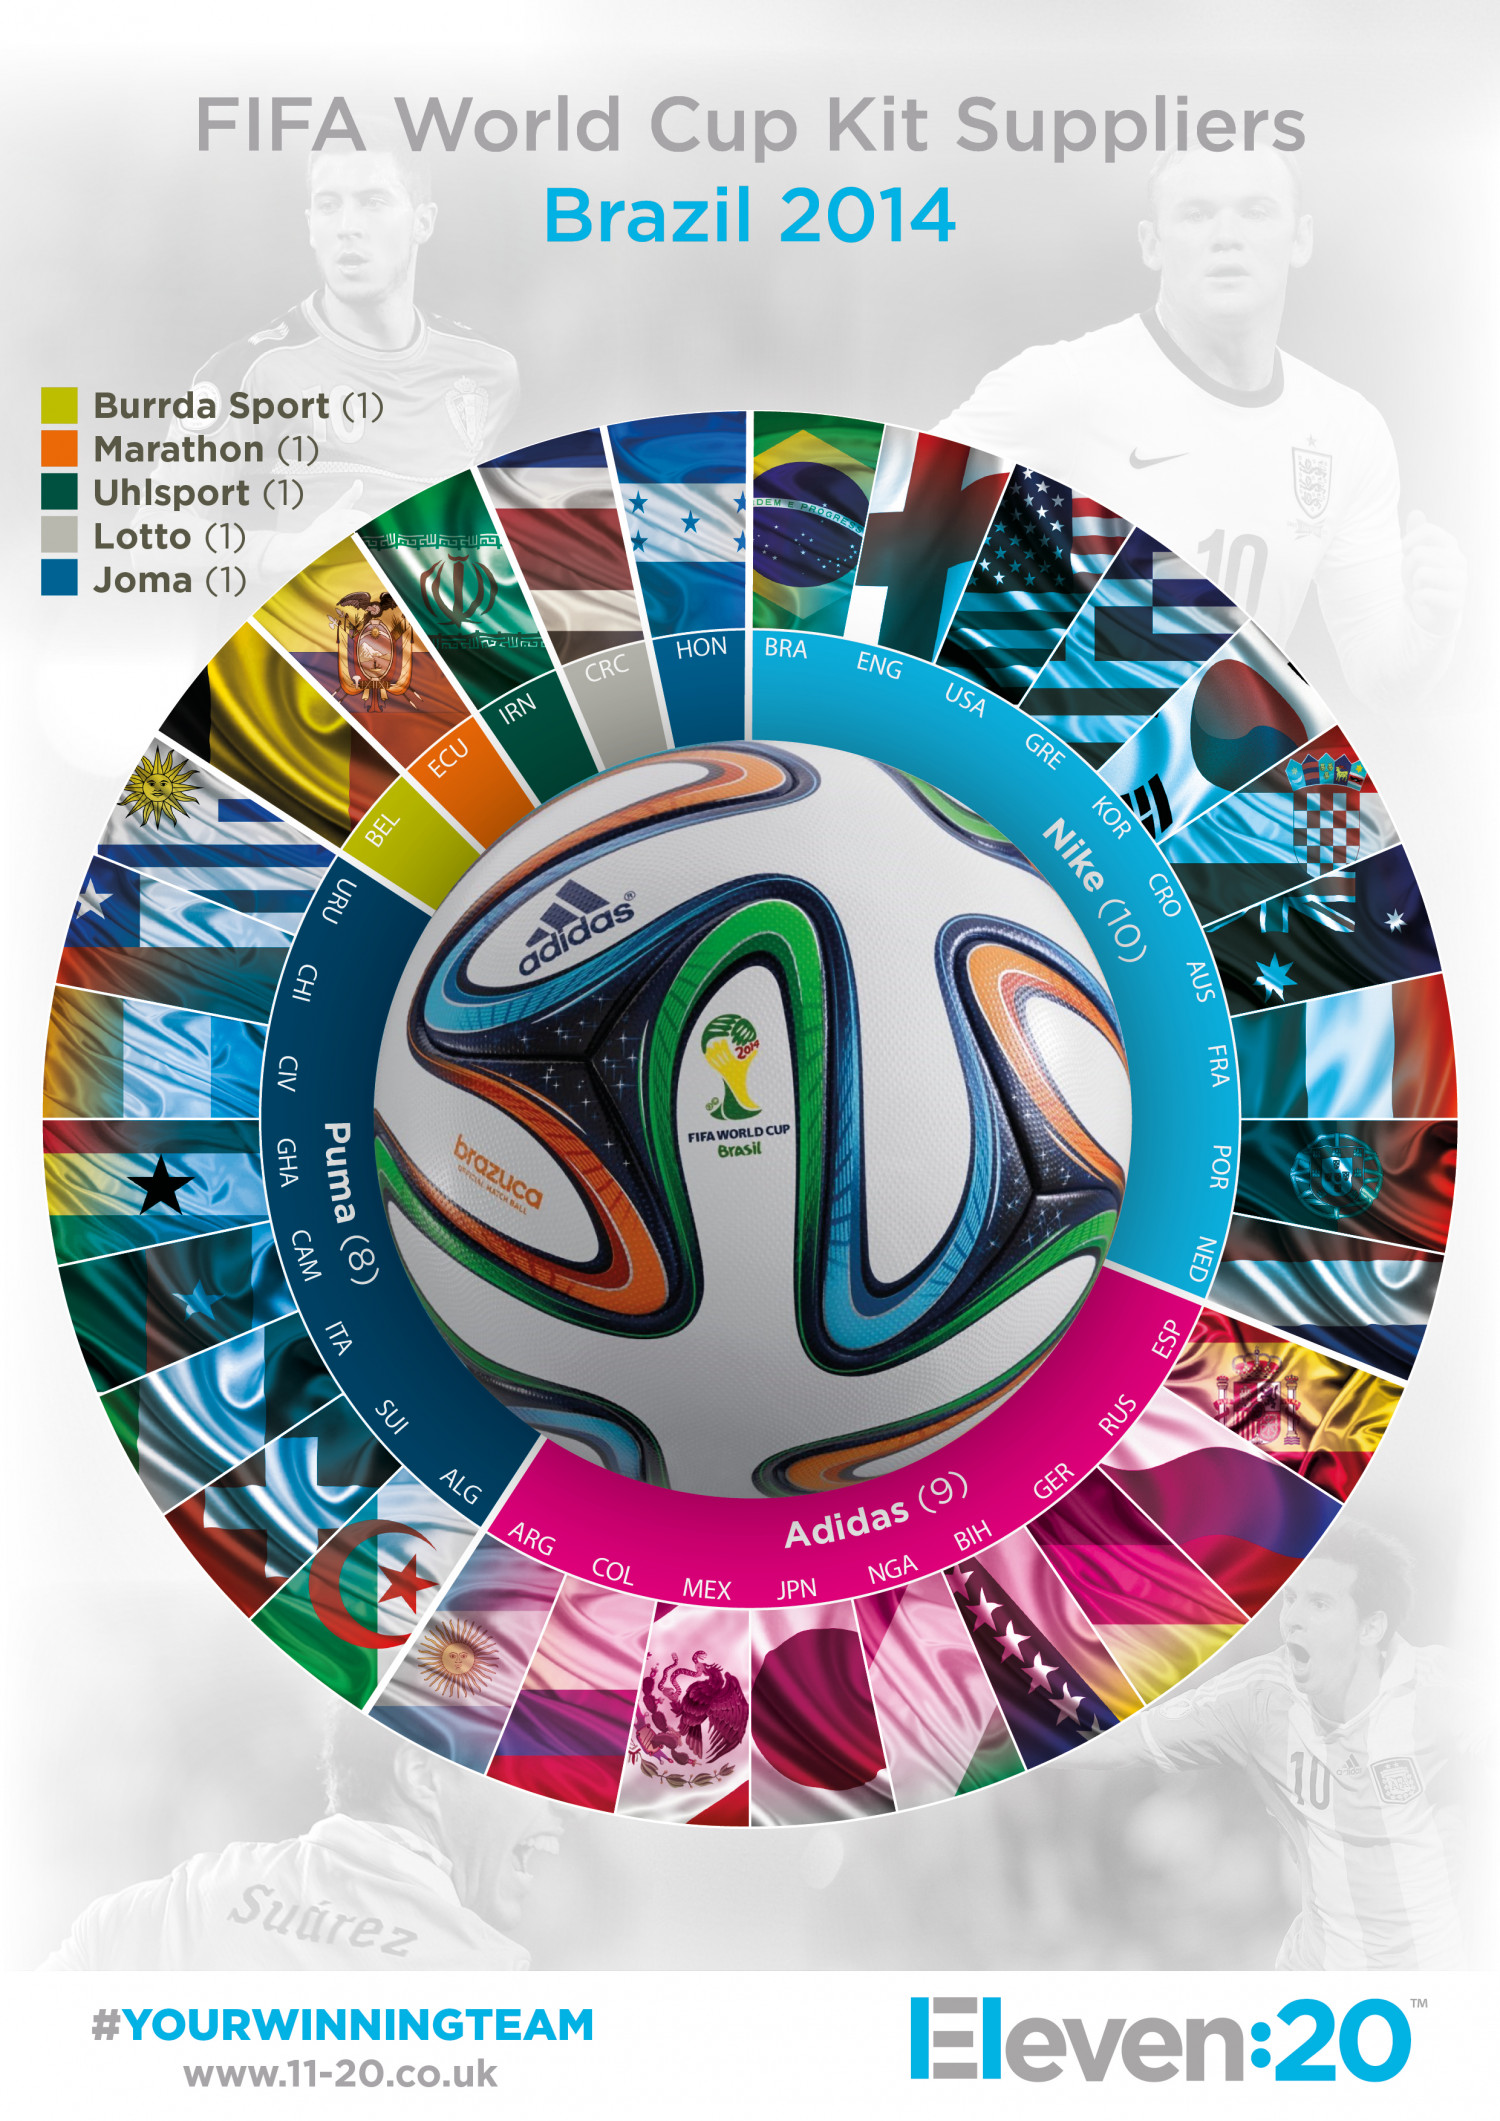 FIFA World Cup Kit Suppliers Brazil 2014 Infographic